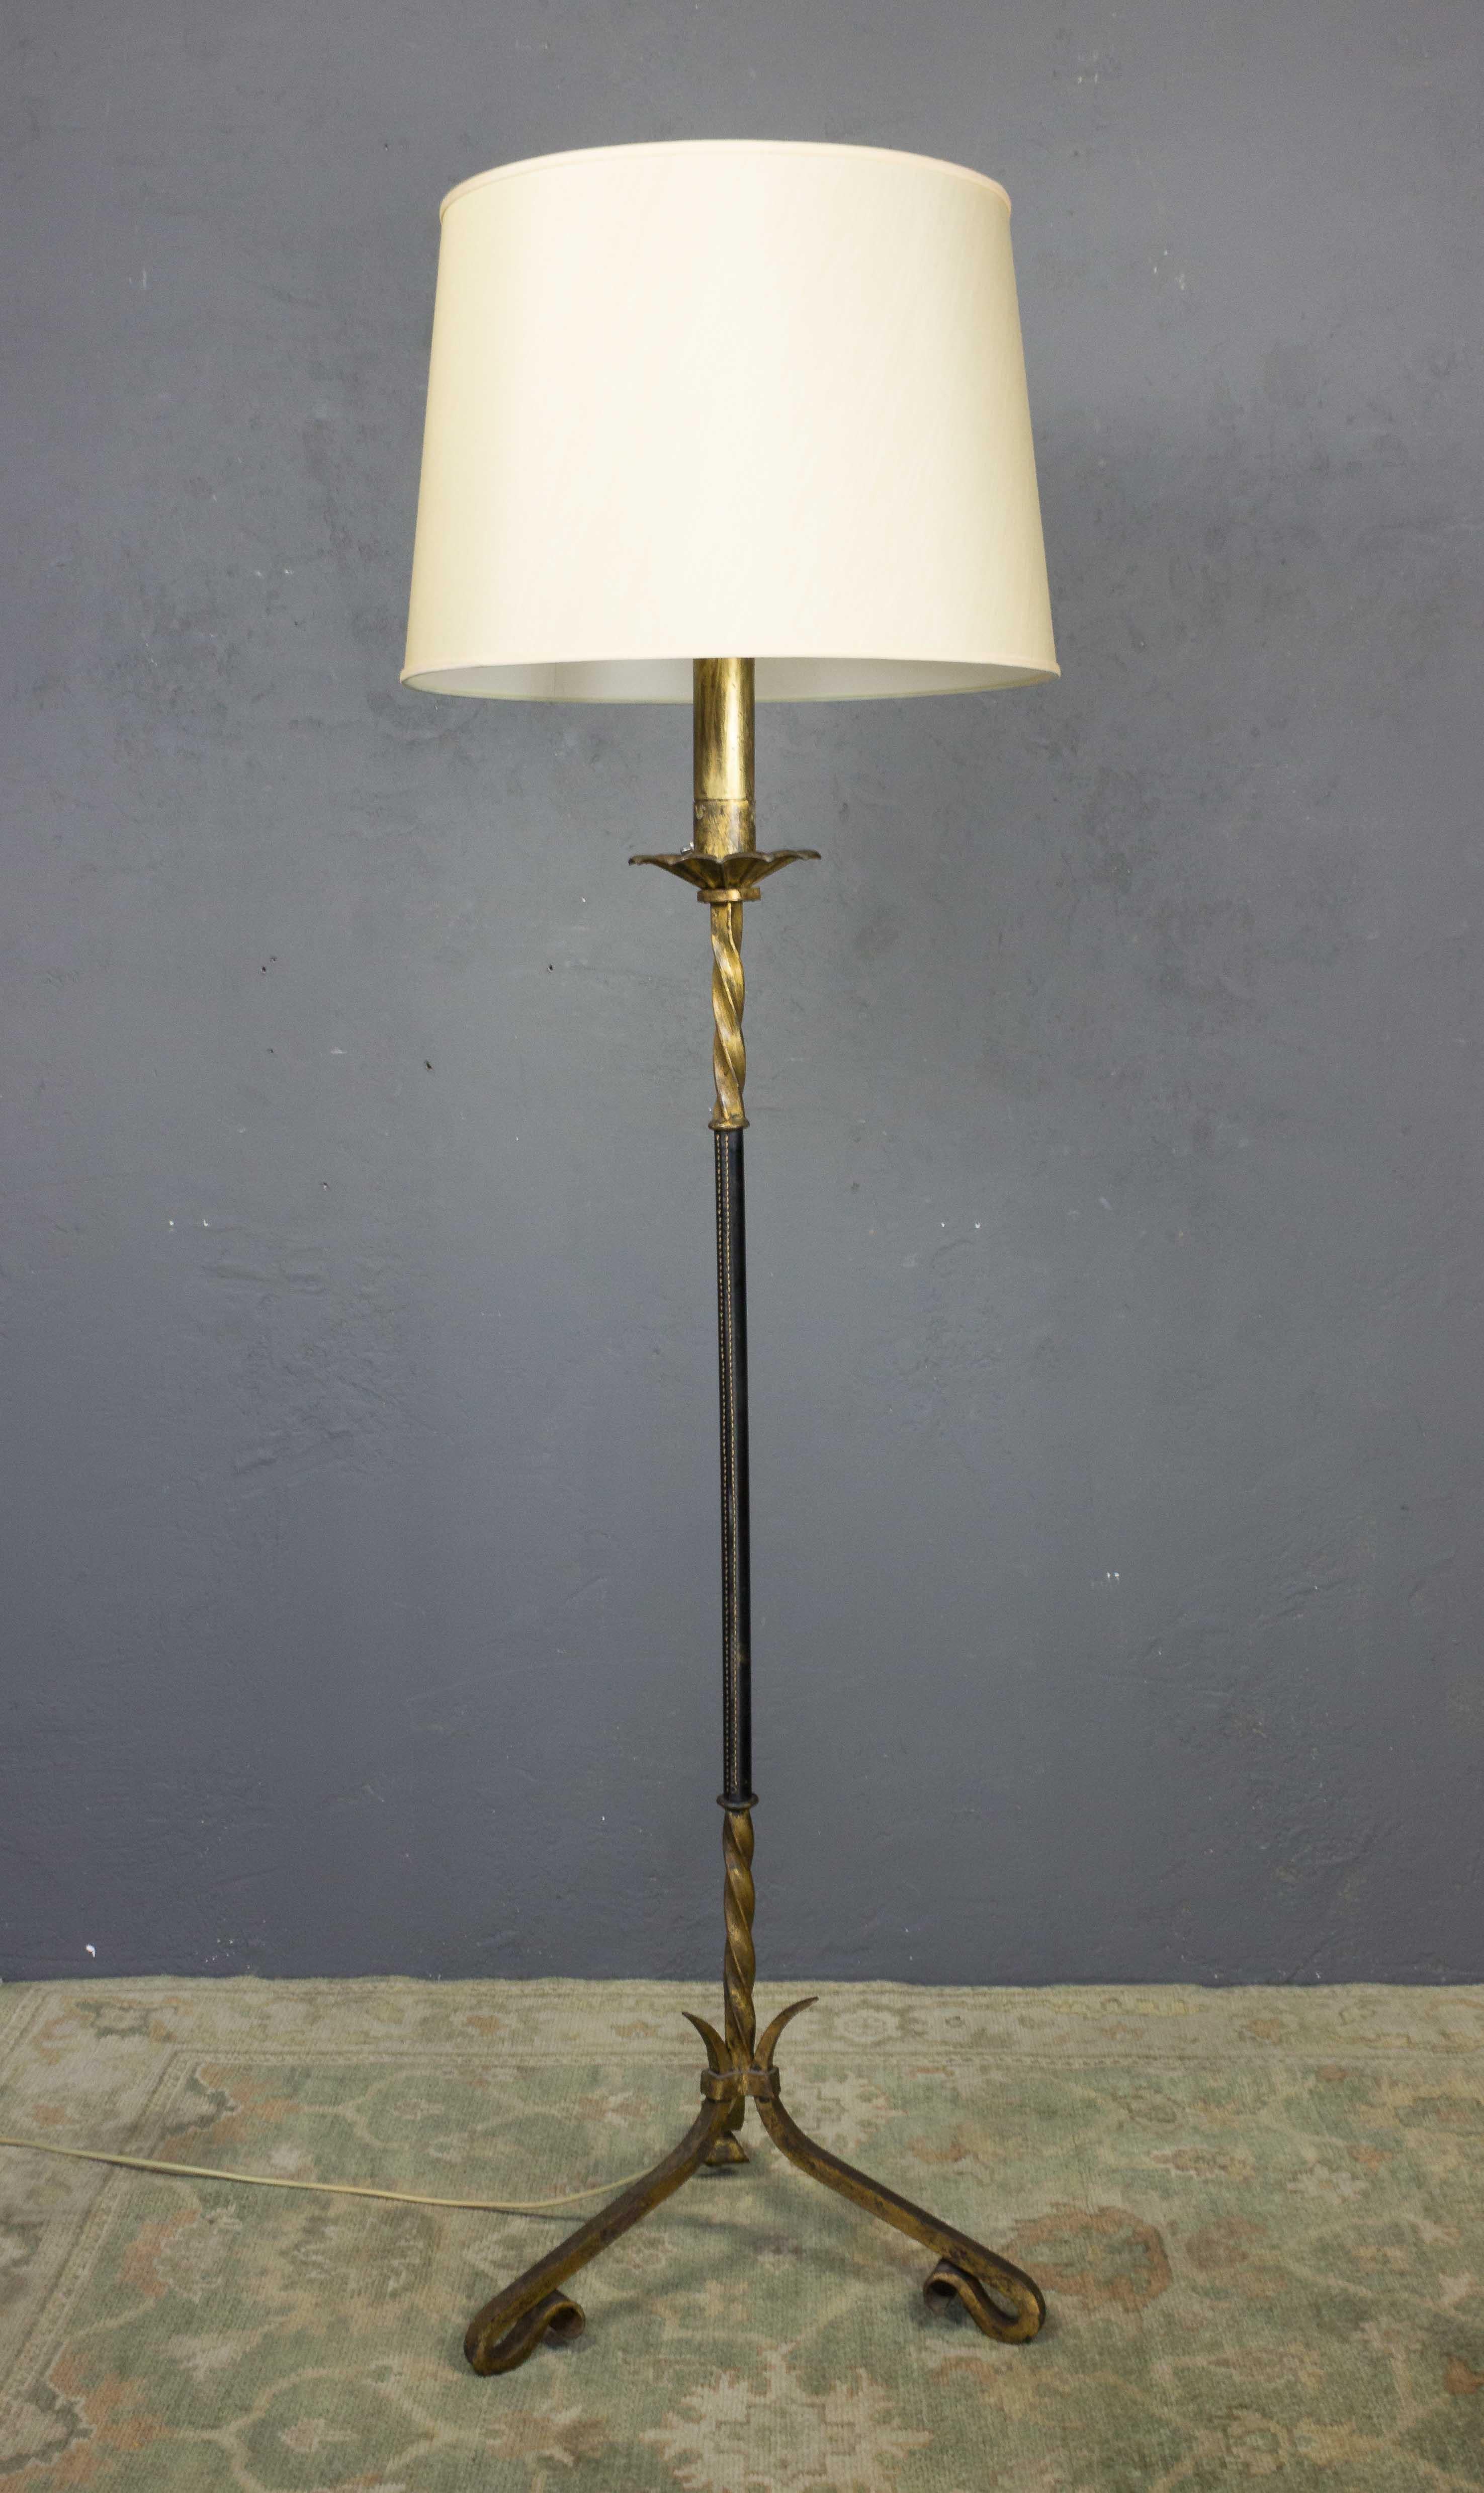 A pair of gilt iron floor lamps with a wrapped leather stems. Shades not included, Spanish, 1950s.